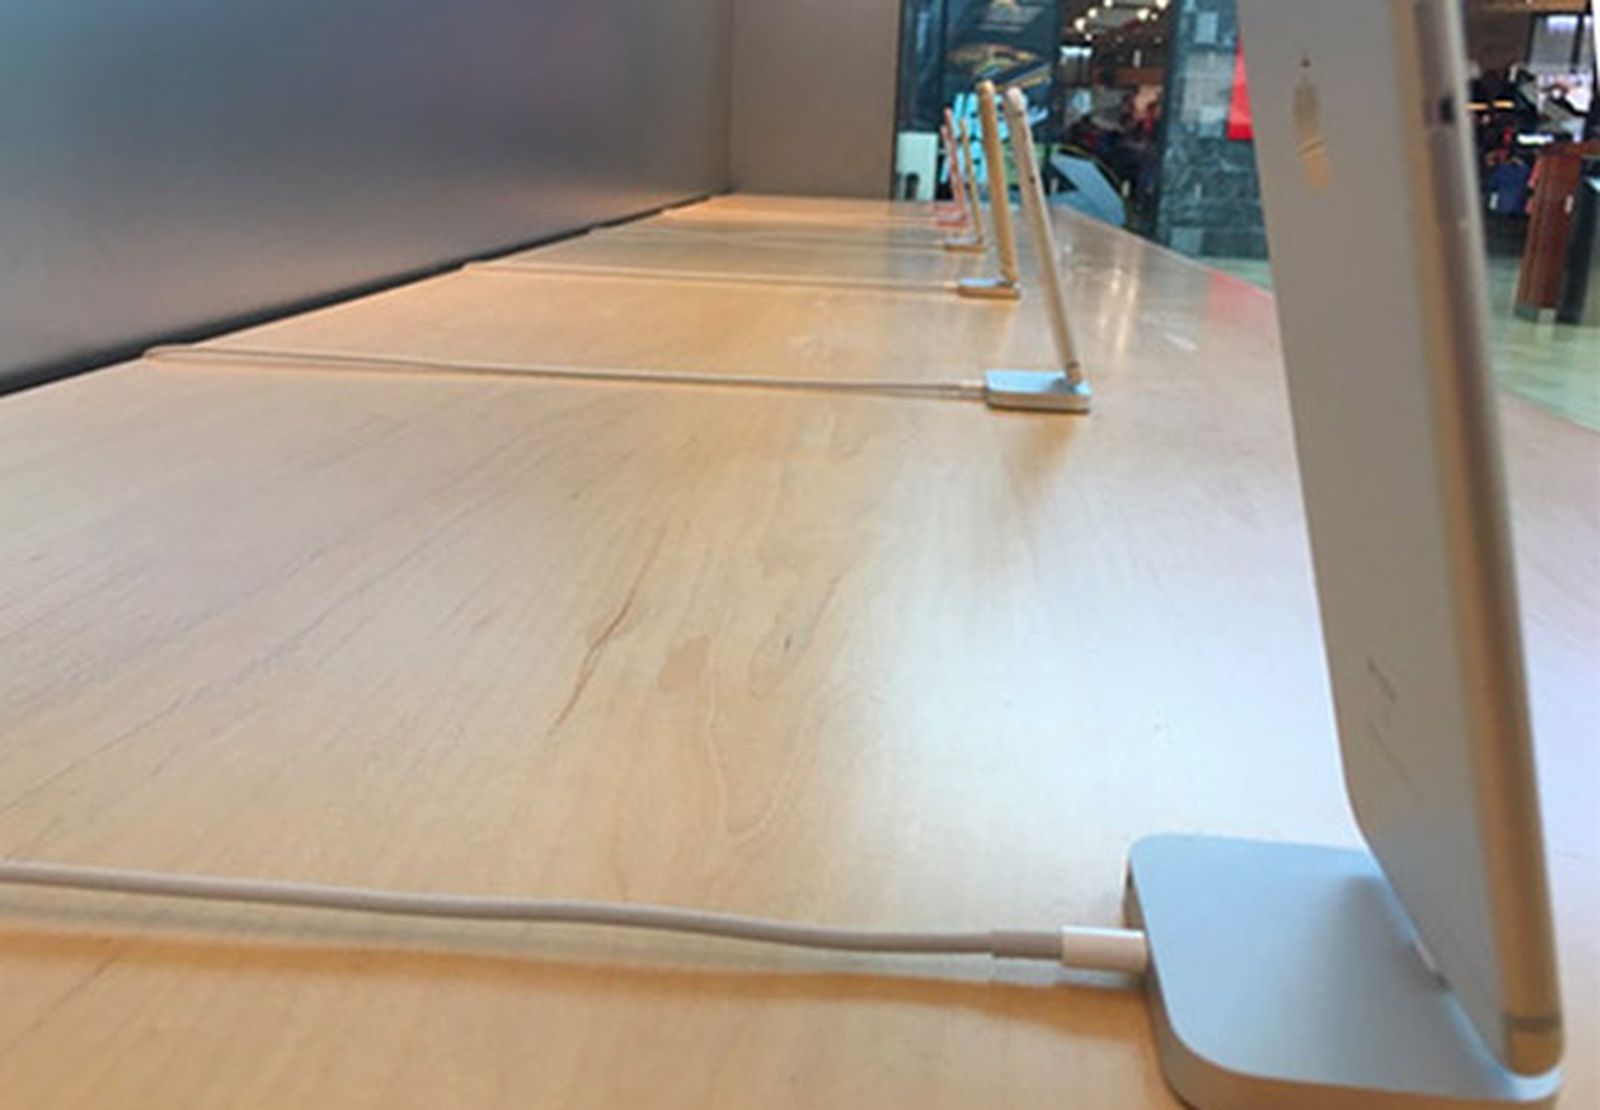 Tipping at the Apple Store? How and Where It Might Happen - CNET